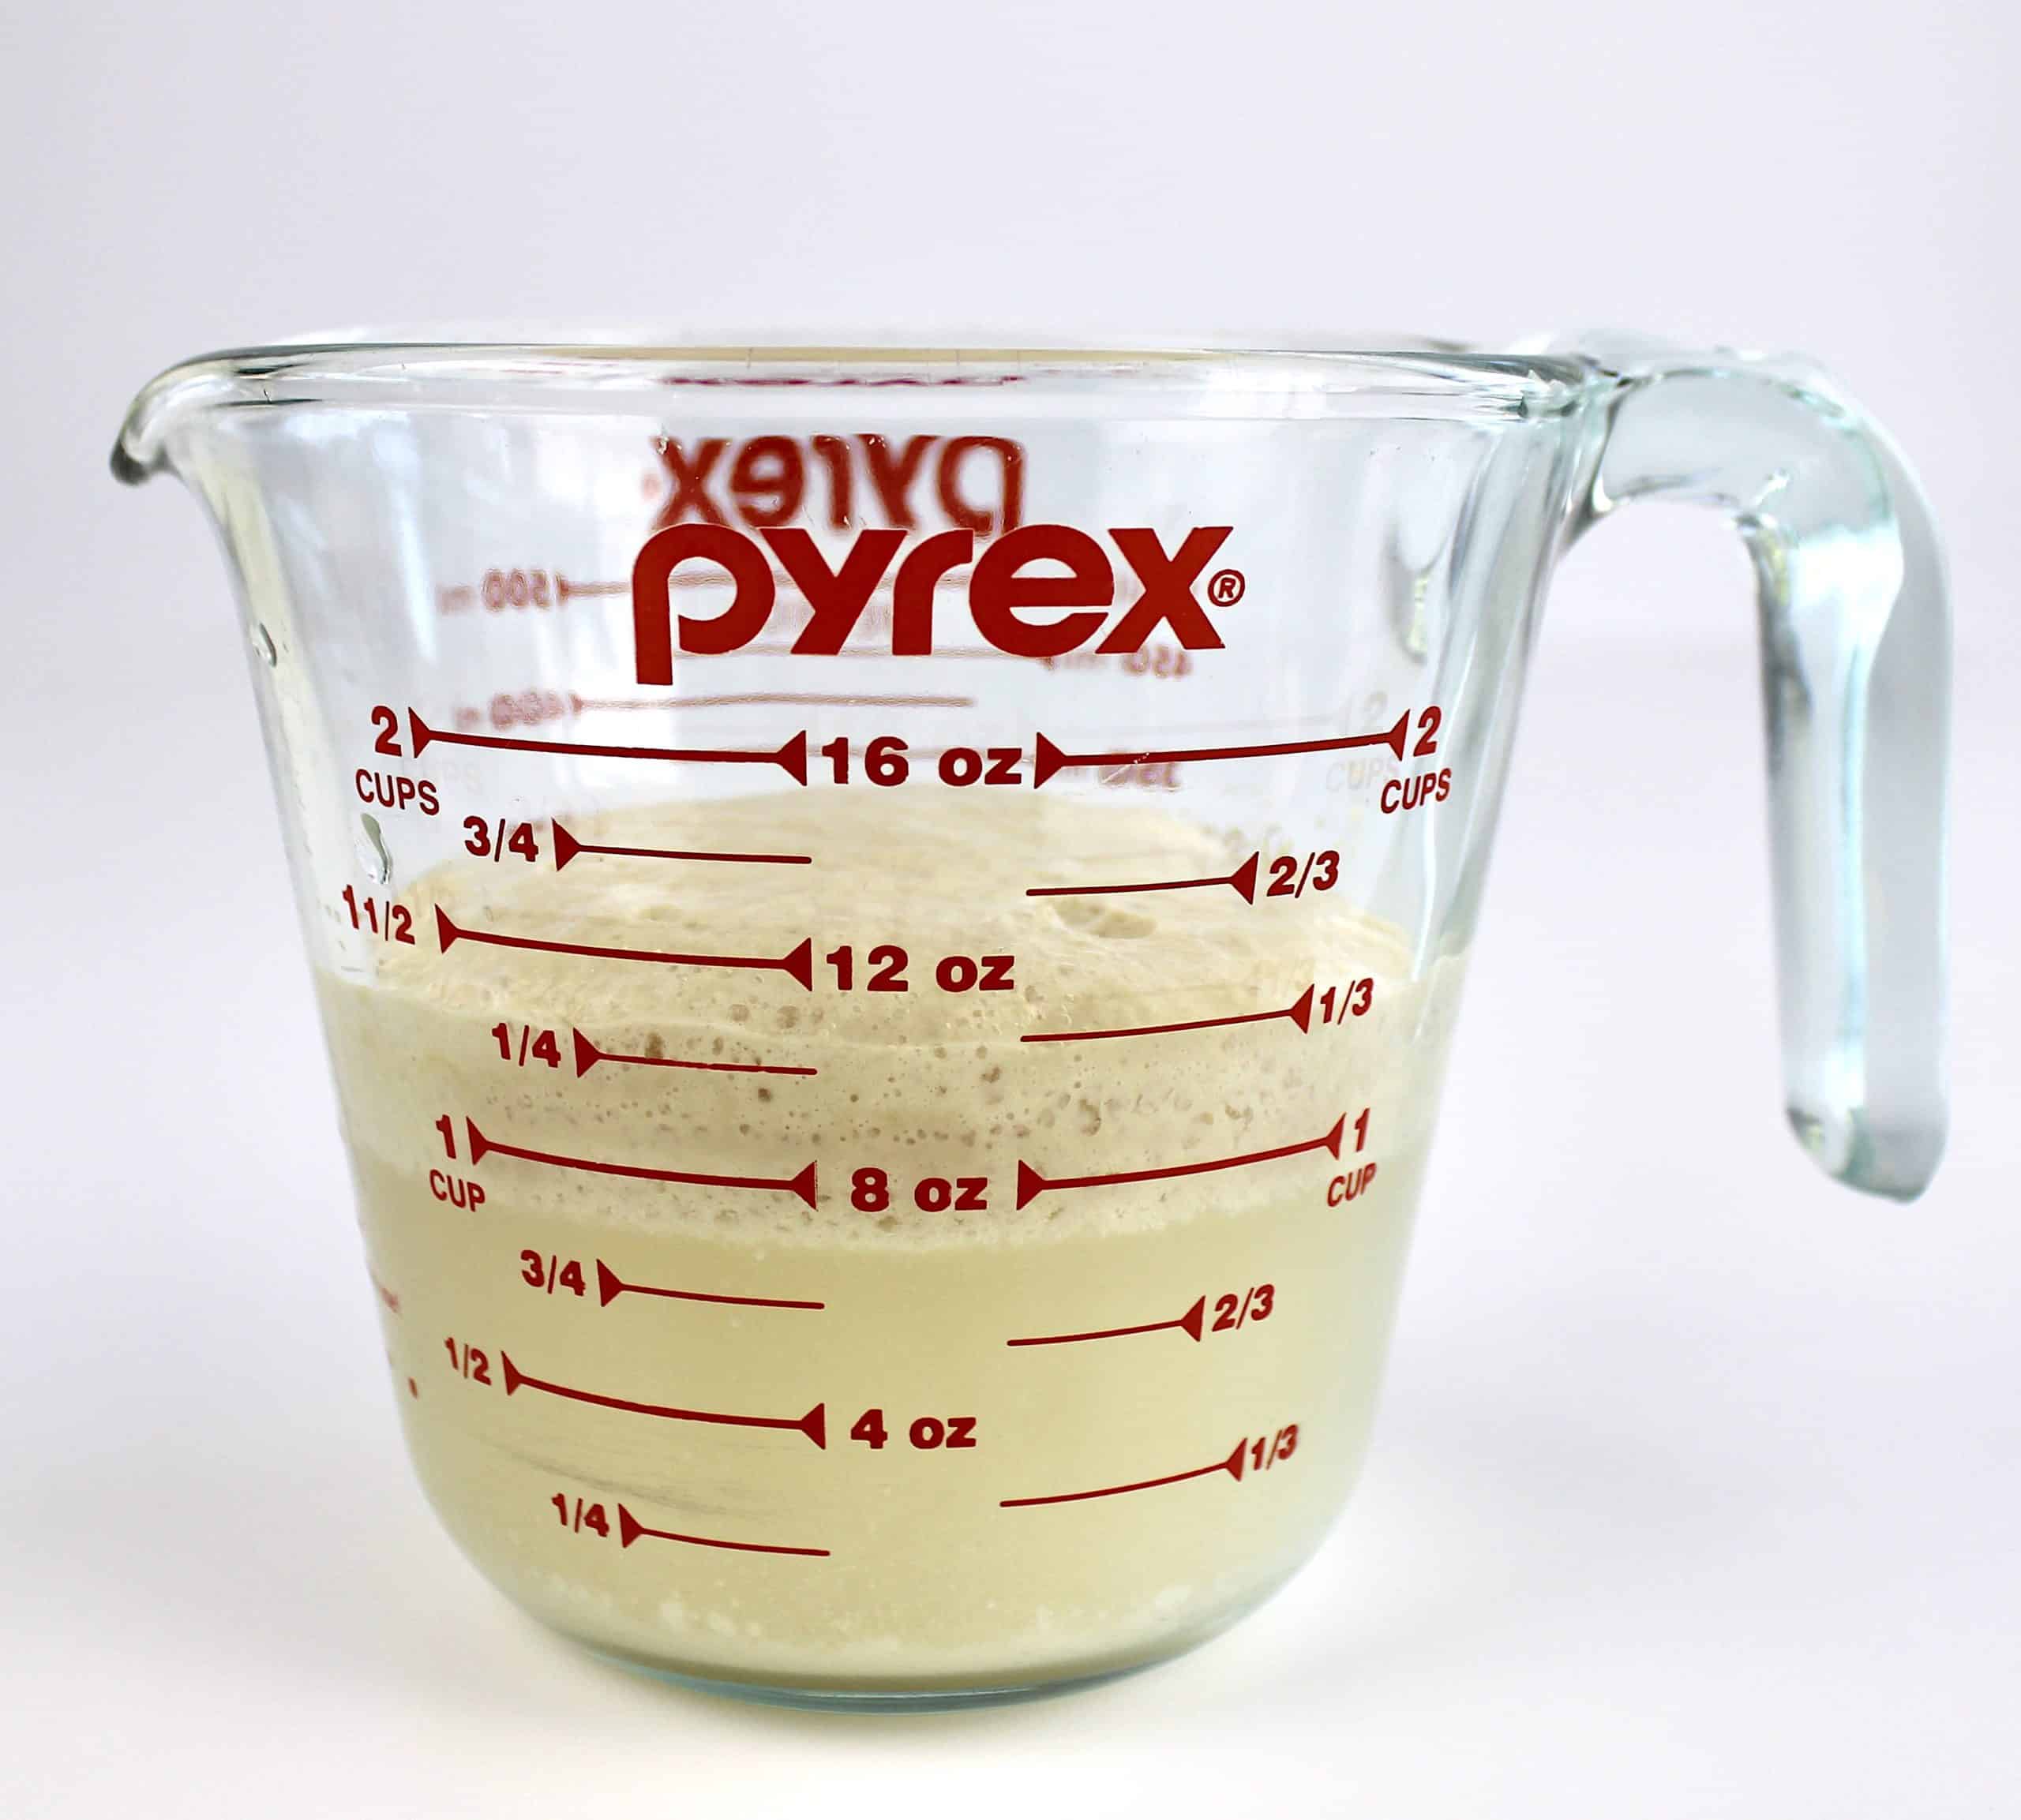 yeast water in pyrex measuring glass